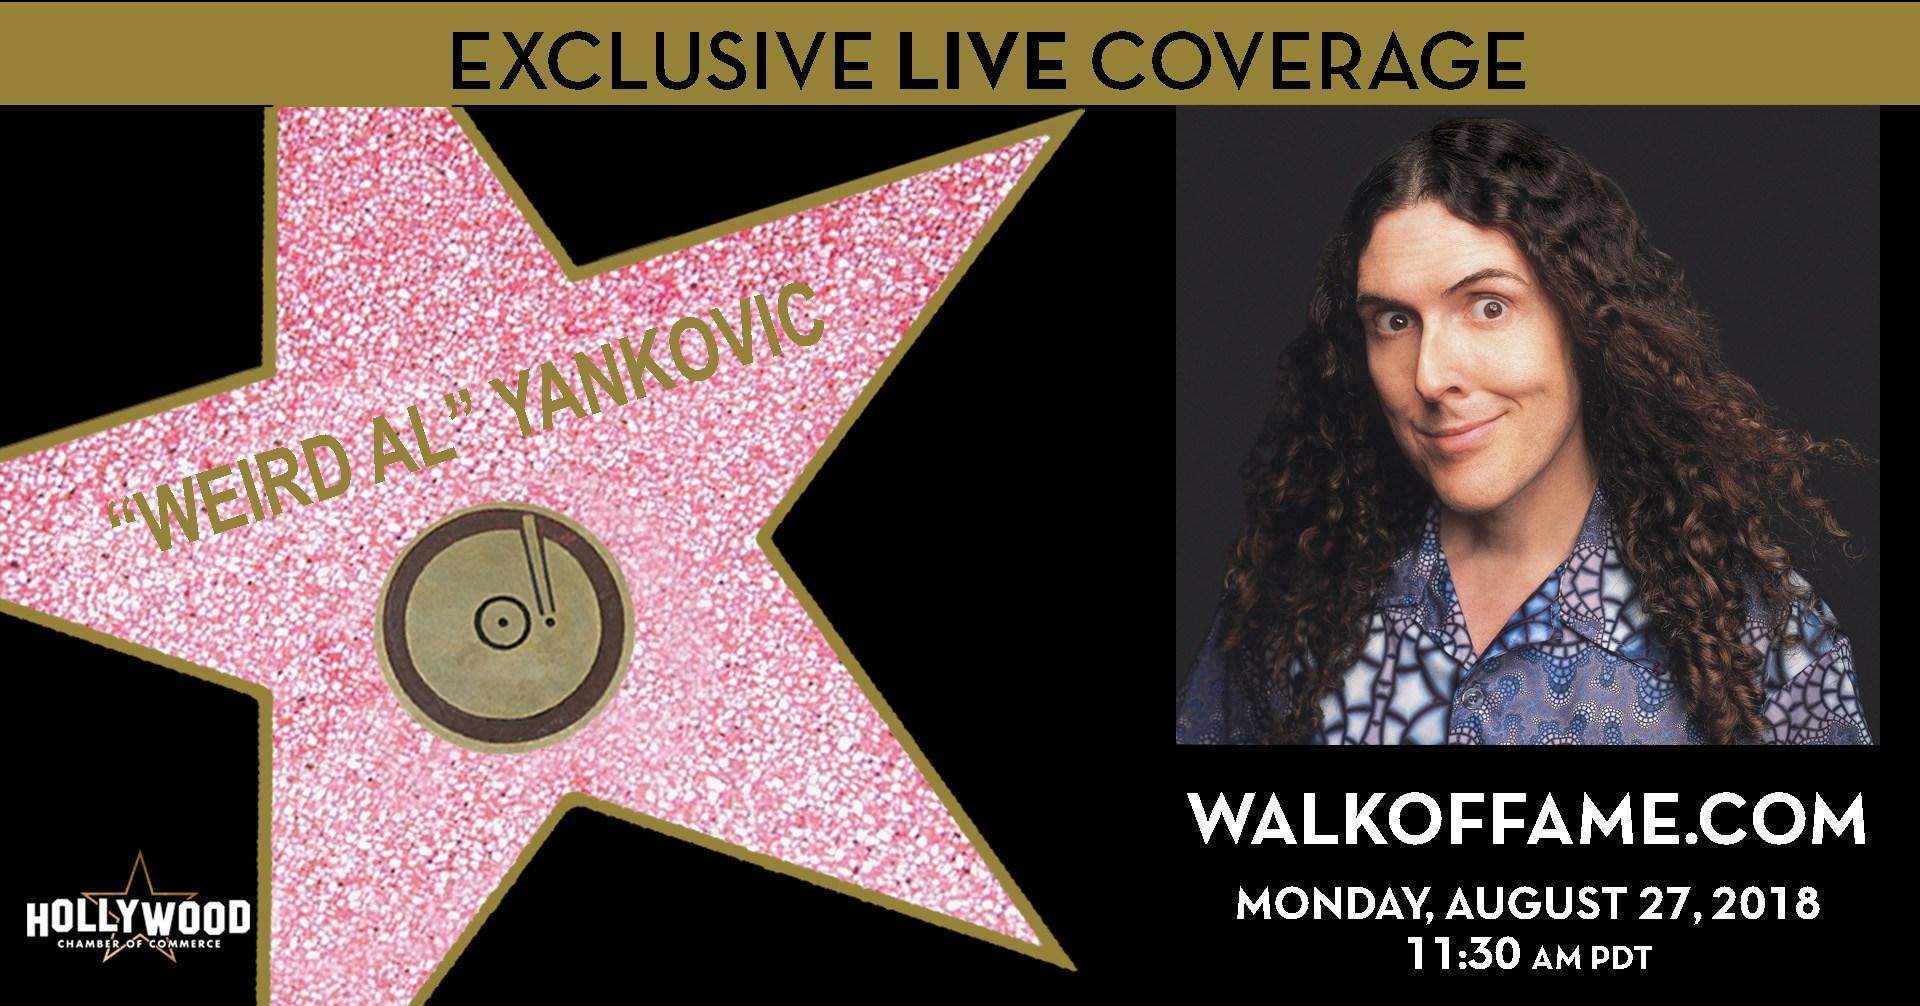 HOLLYWOOD CHAMBER OF COMMERCE TO HONOR "WEIRD AL" YANKOVIC WITH STAR ON THE HOLLYWOOD WALK OF FAME